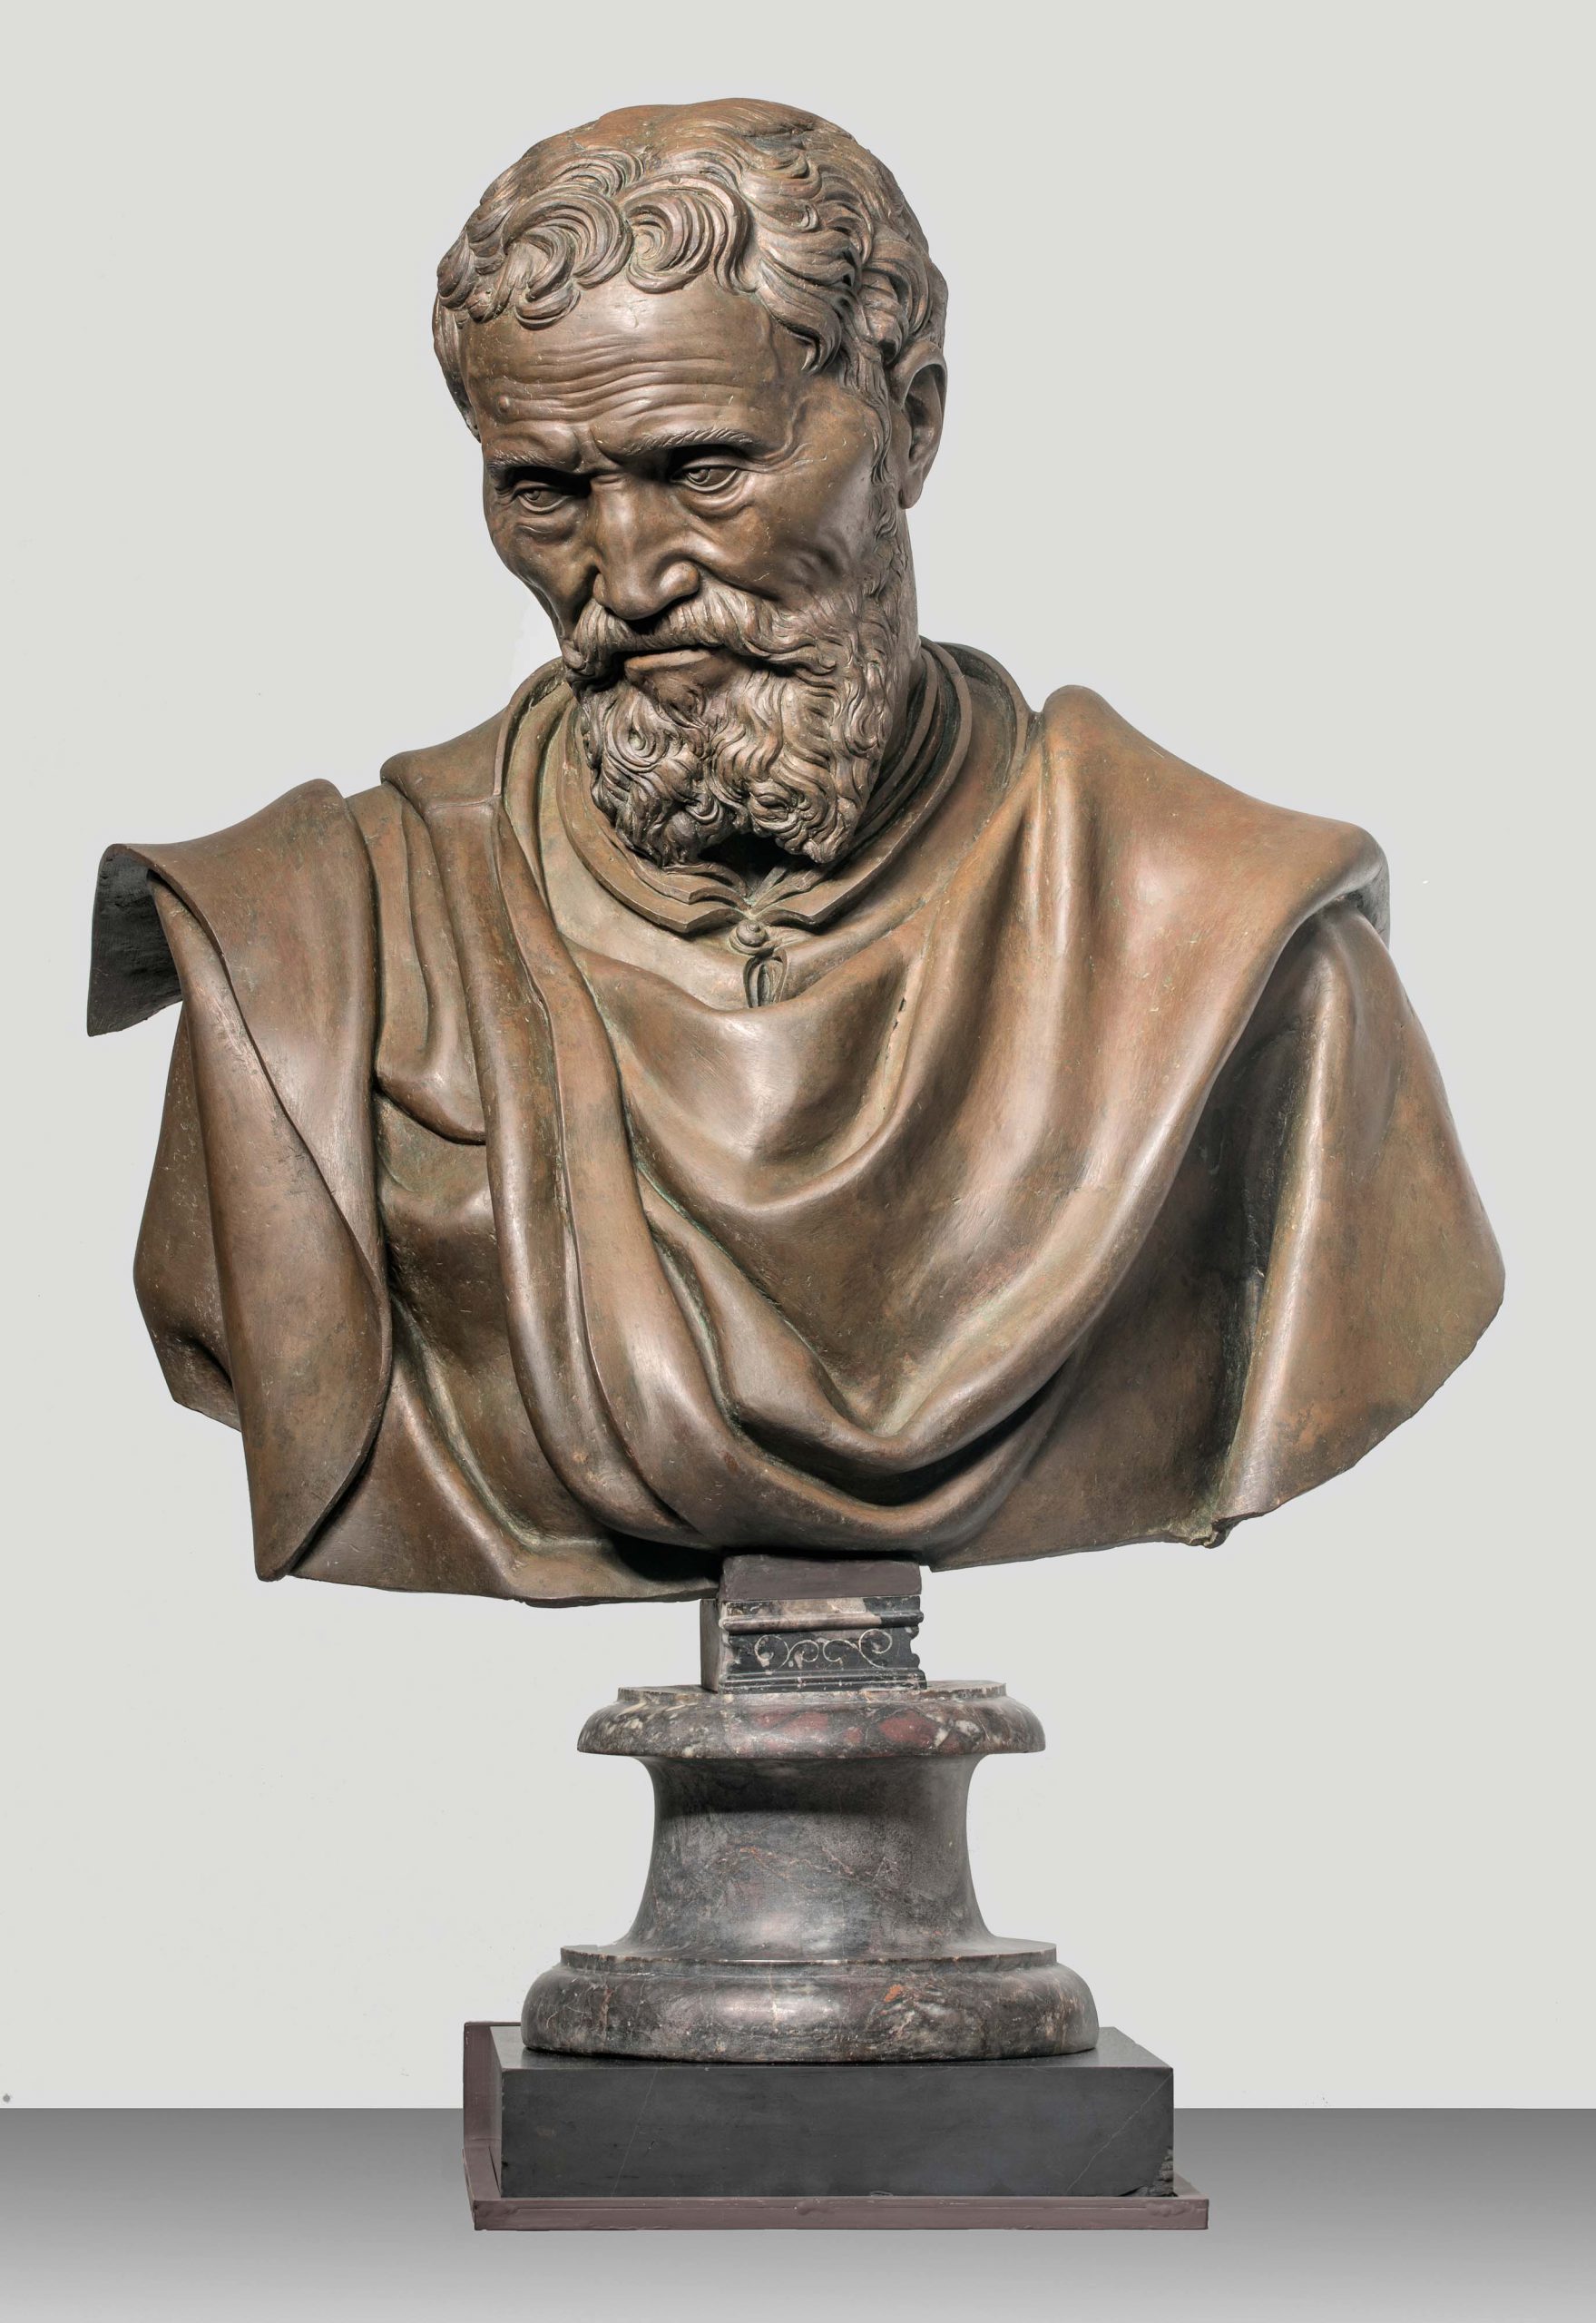 Bust of Michelangelo back on display